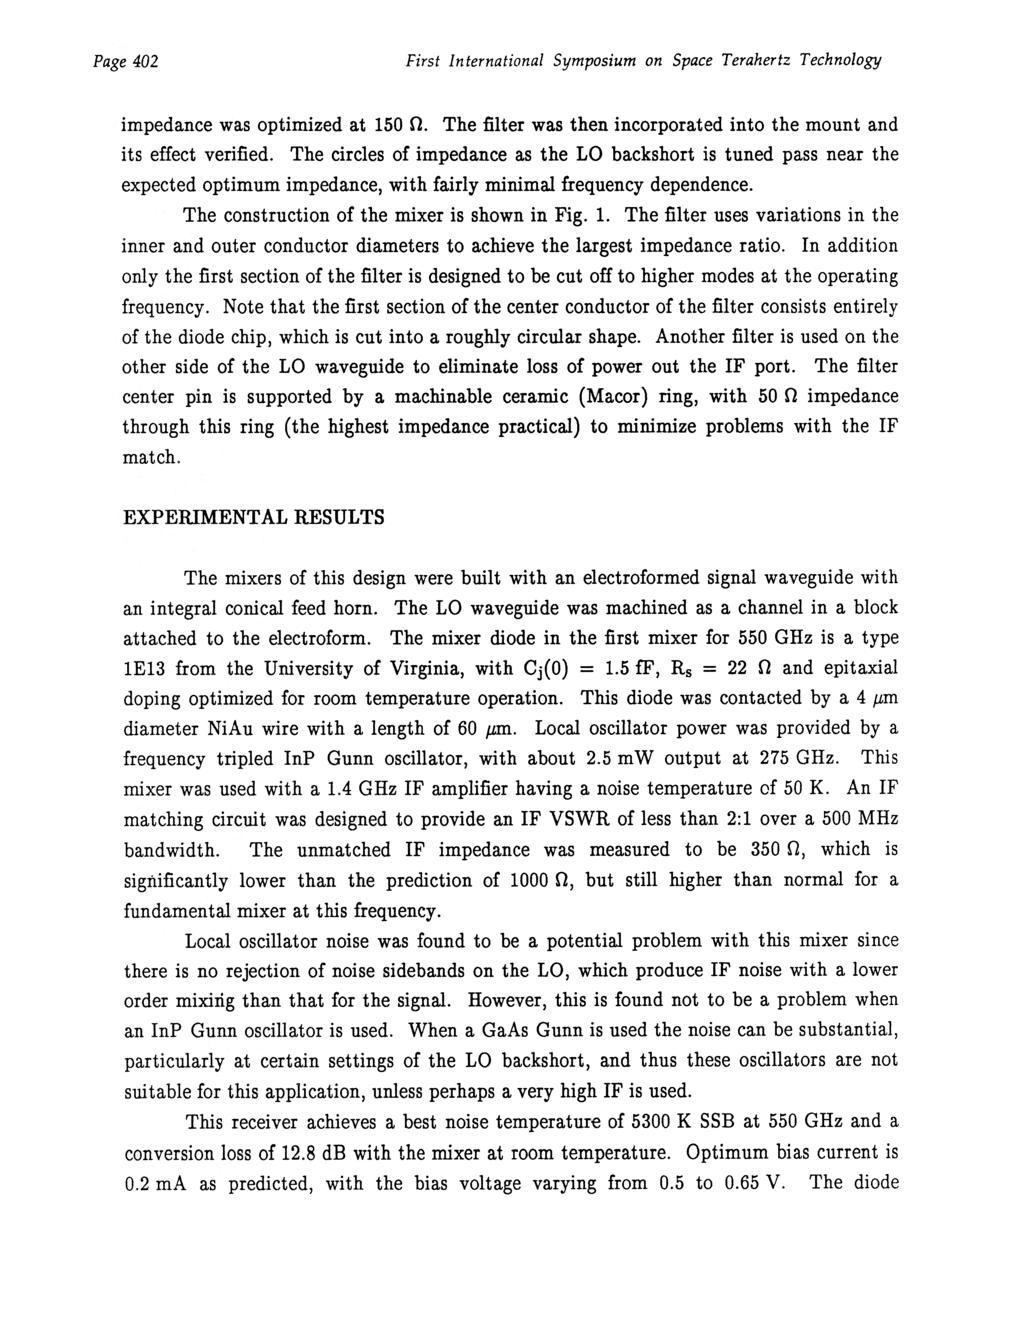 Page 402 First International Symposium on Space Terahertz Technology impedance was optimized at 150 O. The filter was then incorporated into the mount and its effect verified.